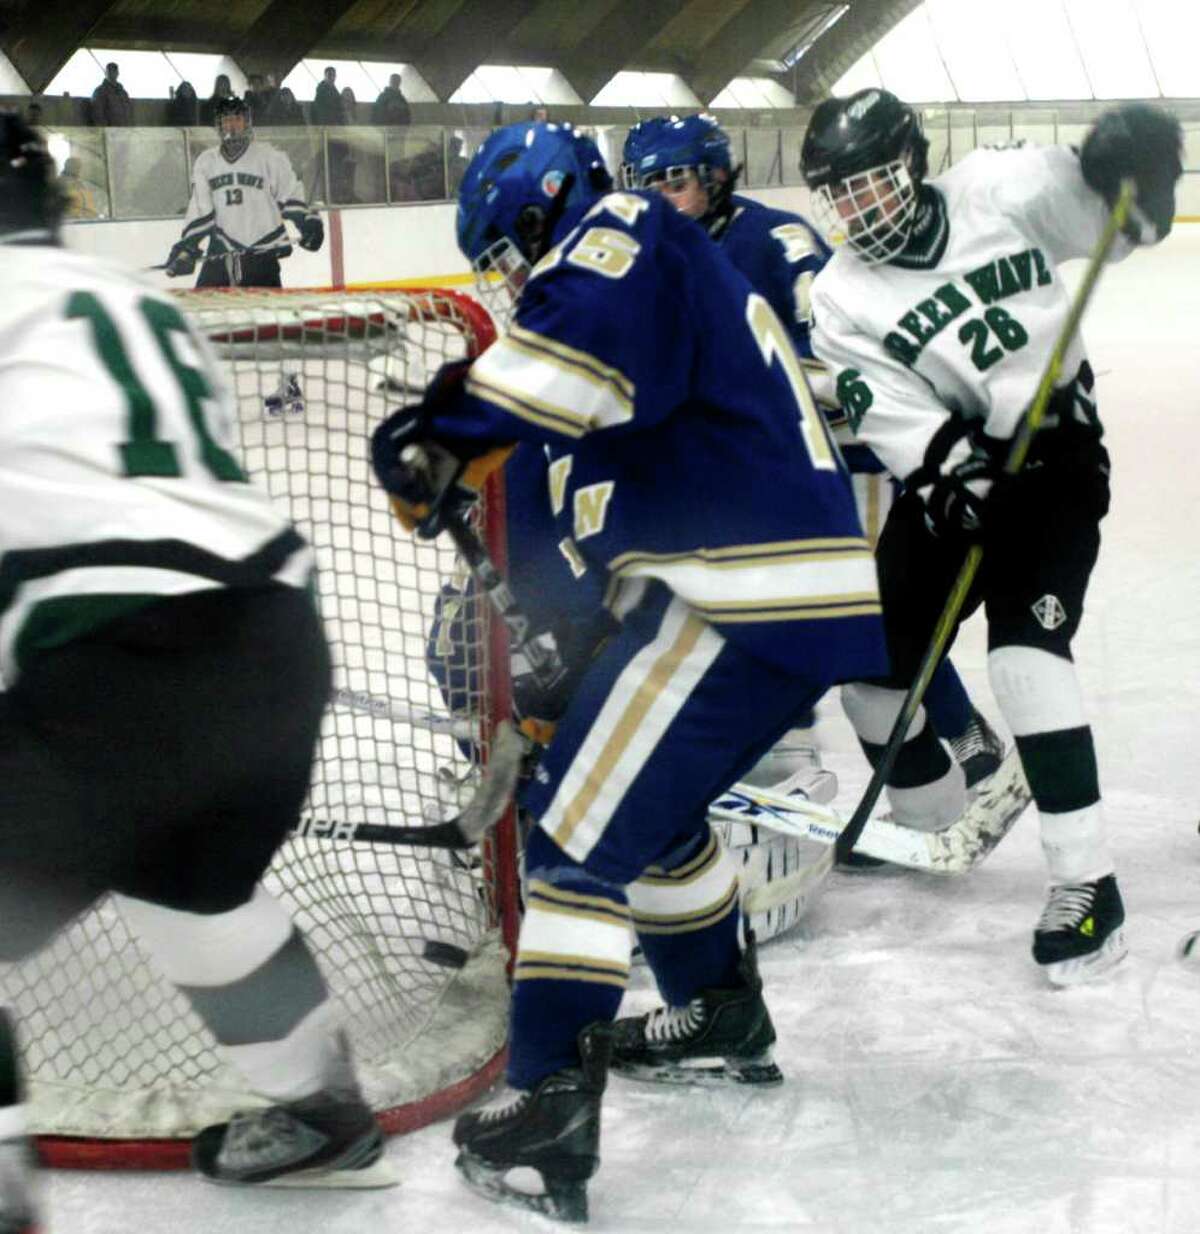 SPECTRUM/The Green Wave's Cody Paquin (26) tries to jam the puck into the net, but the Nighthawk 'D' manages to deflect it just wide as New Milford High School ice hockey team takes on Newtown, Jan. 14, 2012 at South Kent School. Holding his position behind the net is NMHS' Chad Fasig.